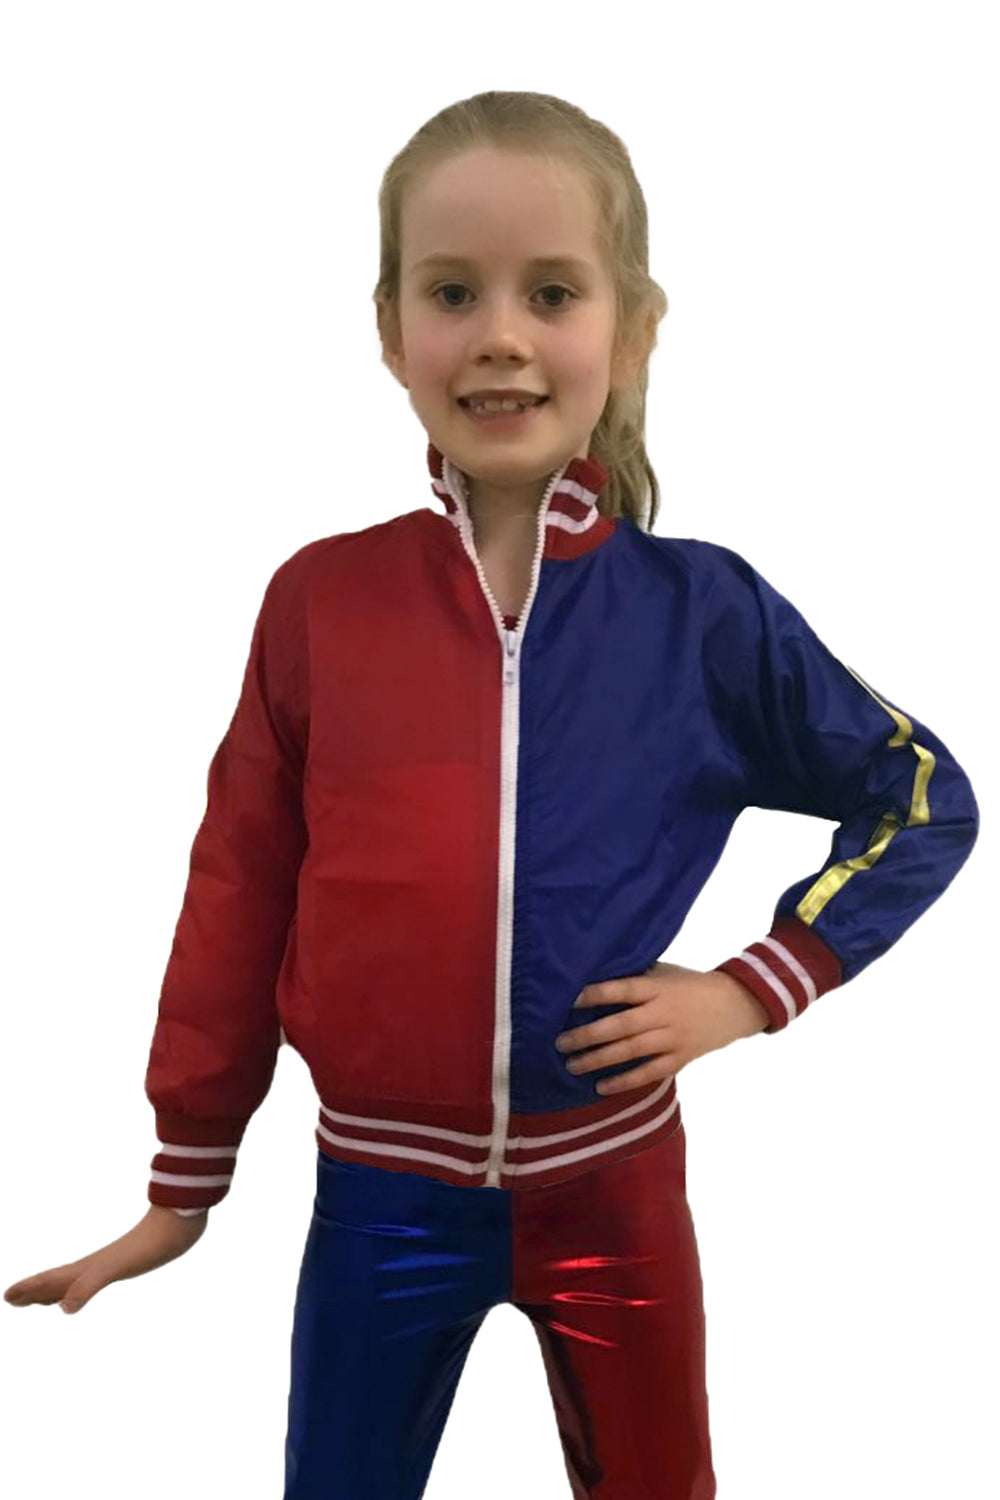 Red and Blue Jacket